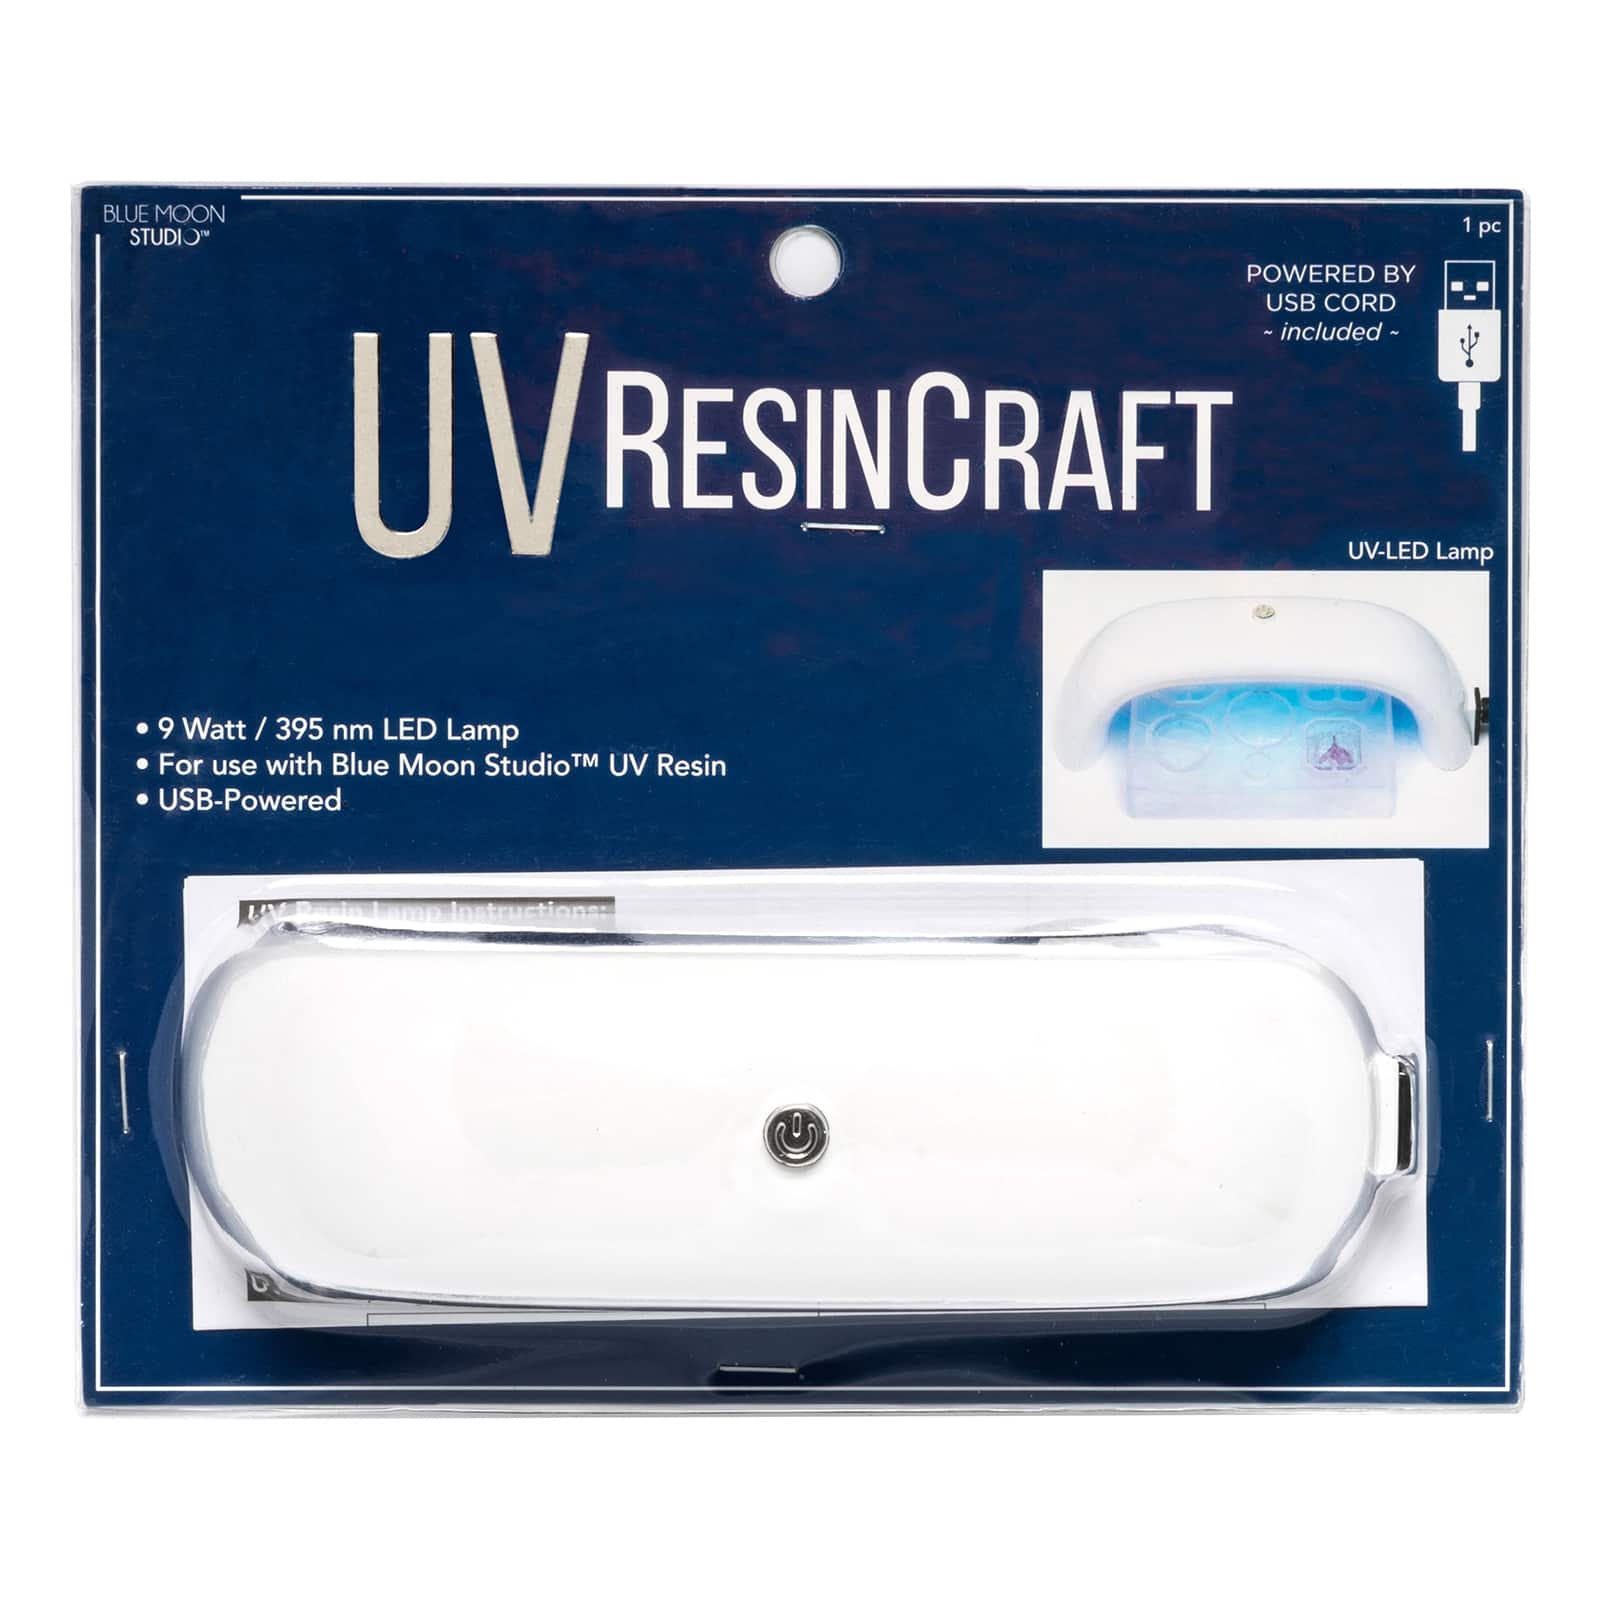 HELP! I bought this UV lamp for resin curing. But I realize that